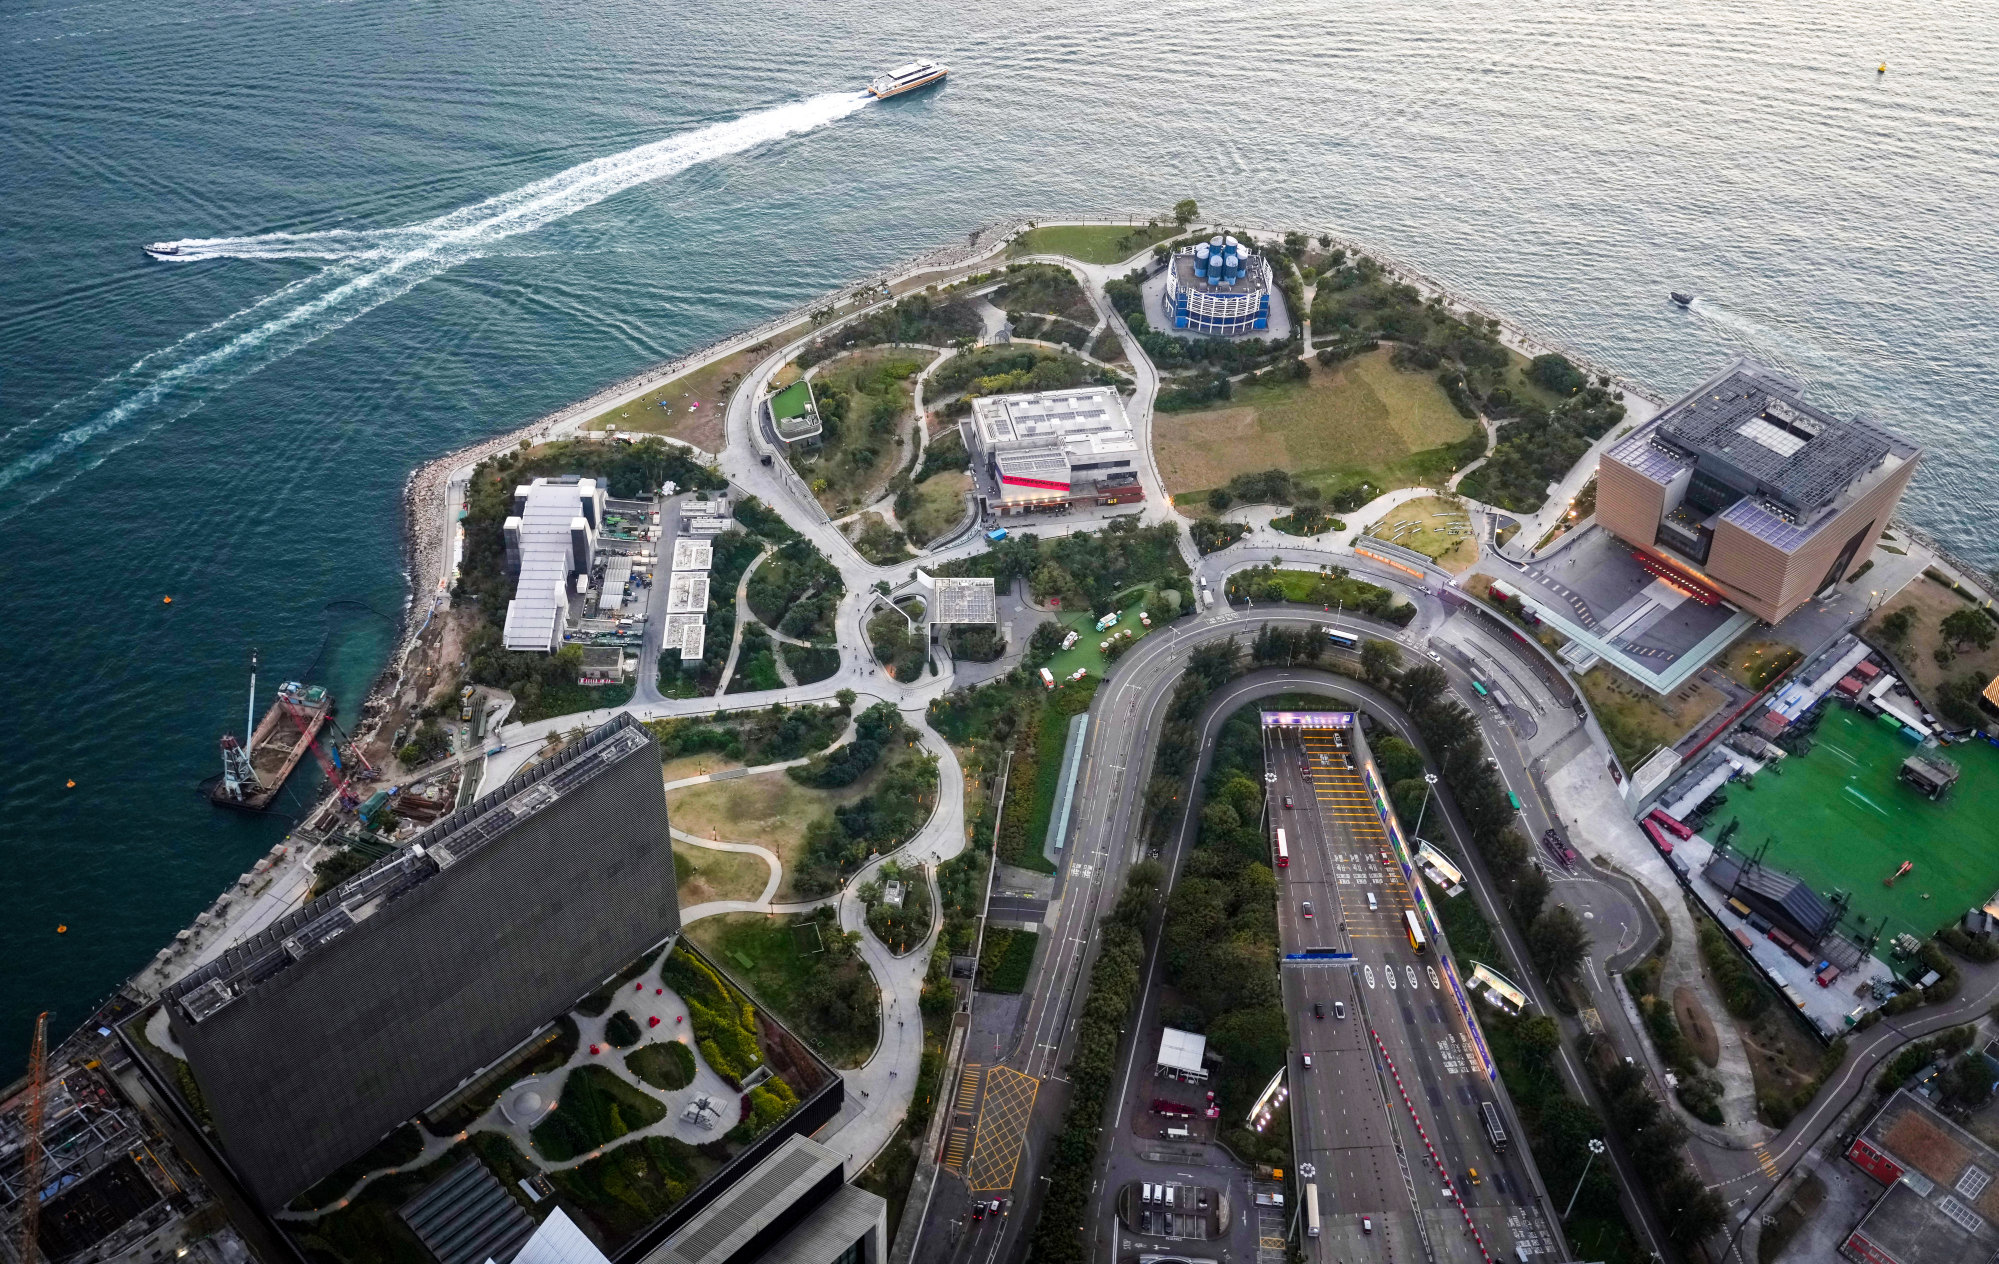 The West Kowloon Cultural District. A funding plan proposes selling part of the hub’s 40 hectares. Photo: Sam Tsang